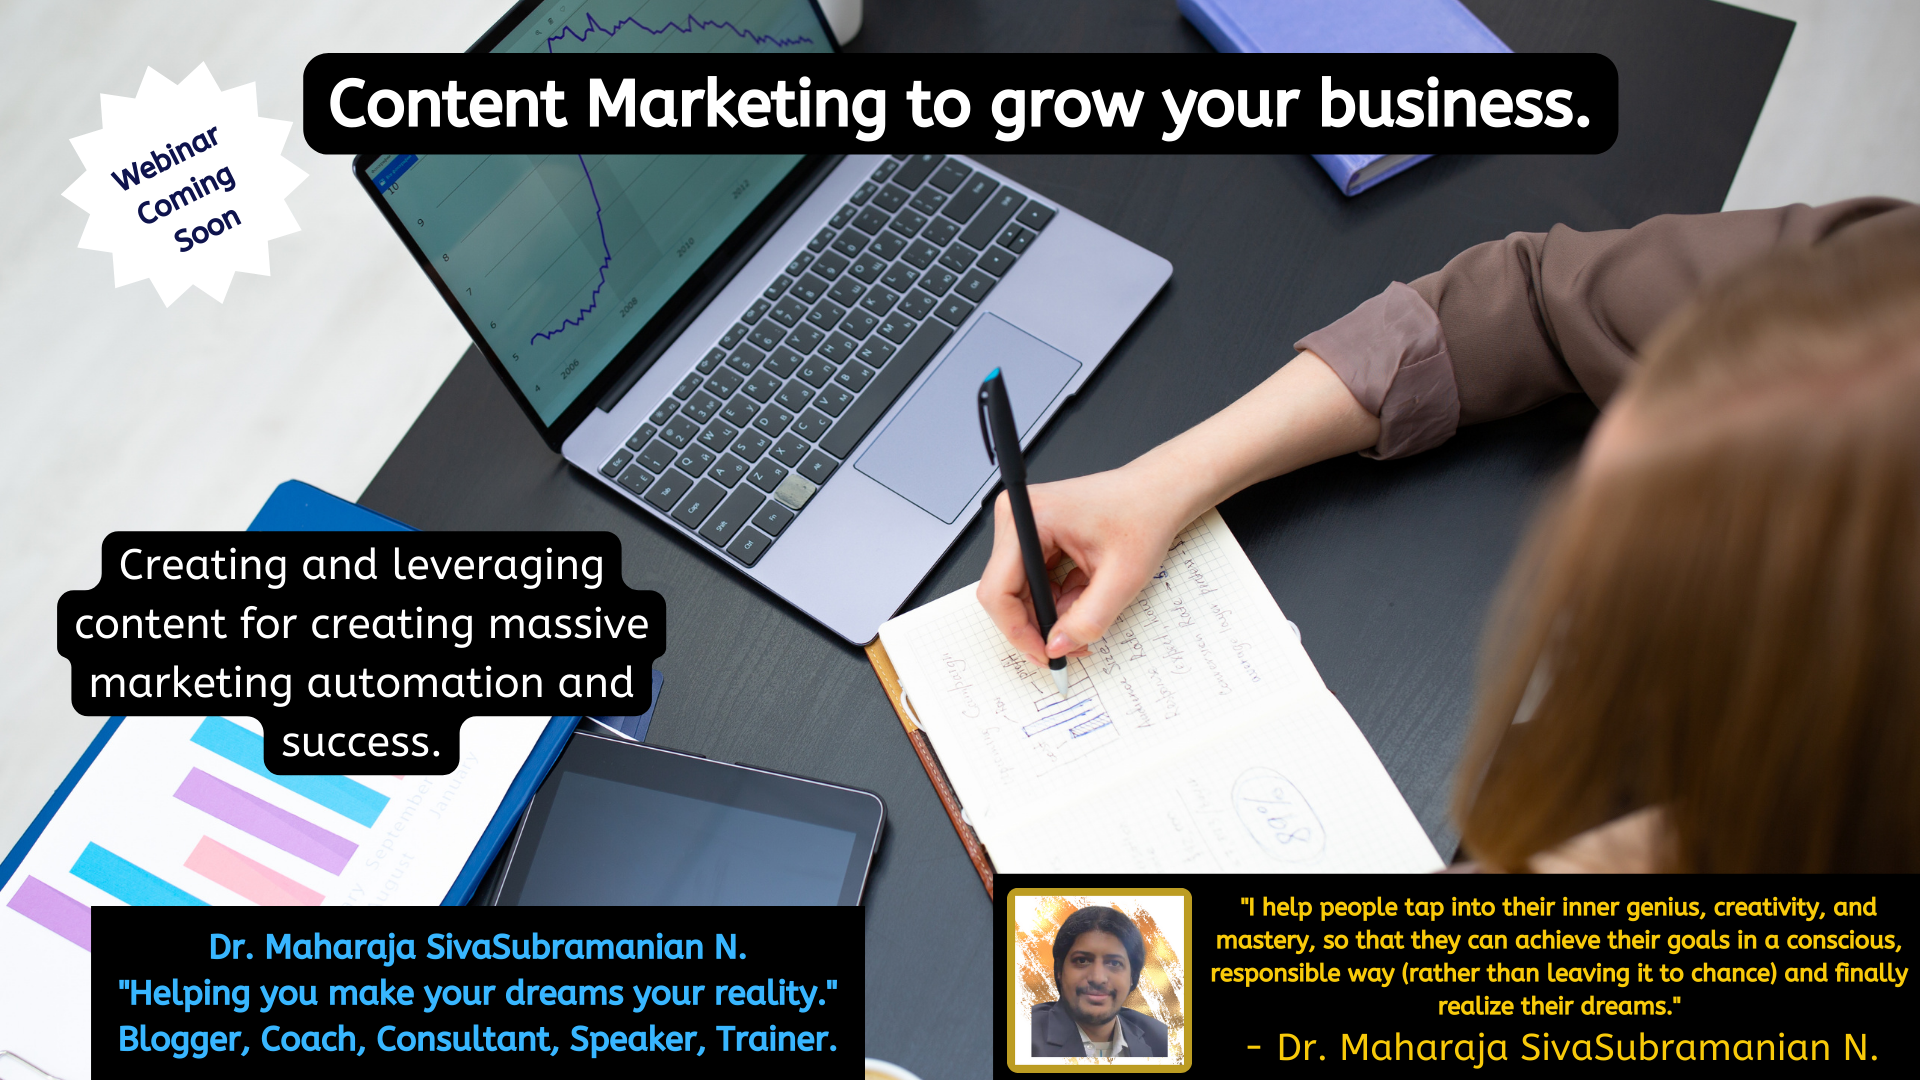 Content Marketing to grow your business. – Upcoming free webinar.